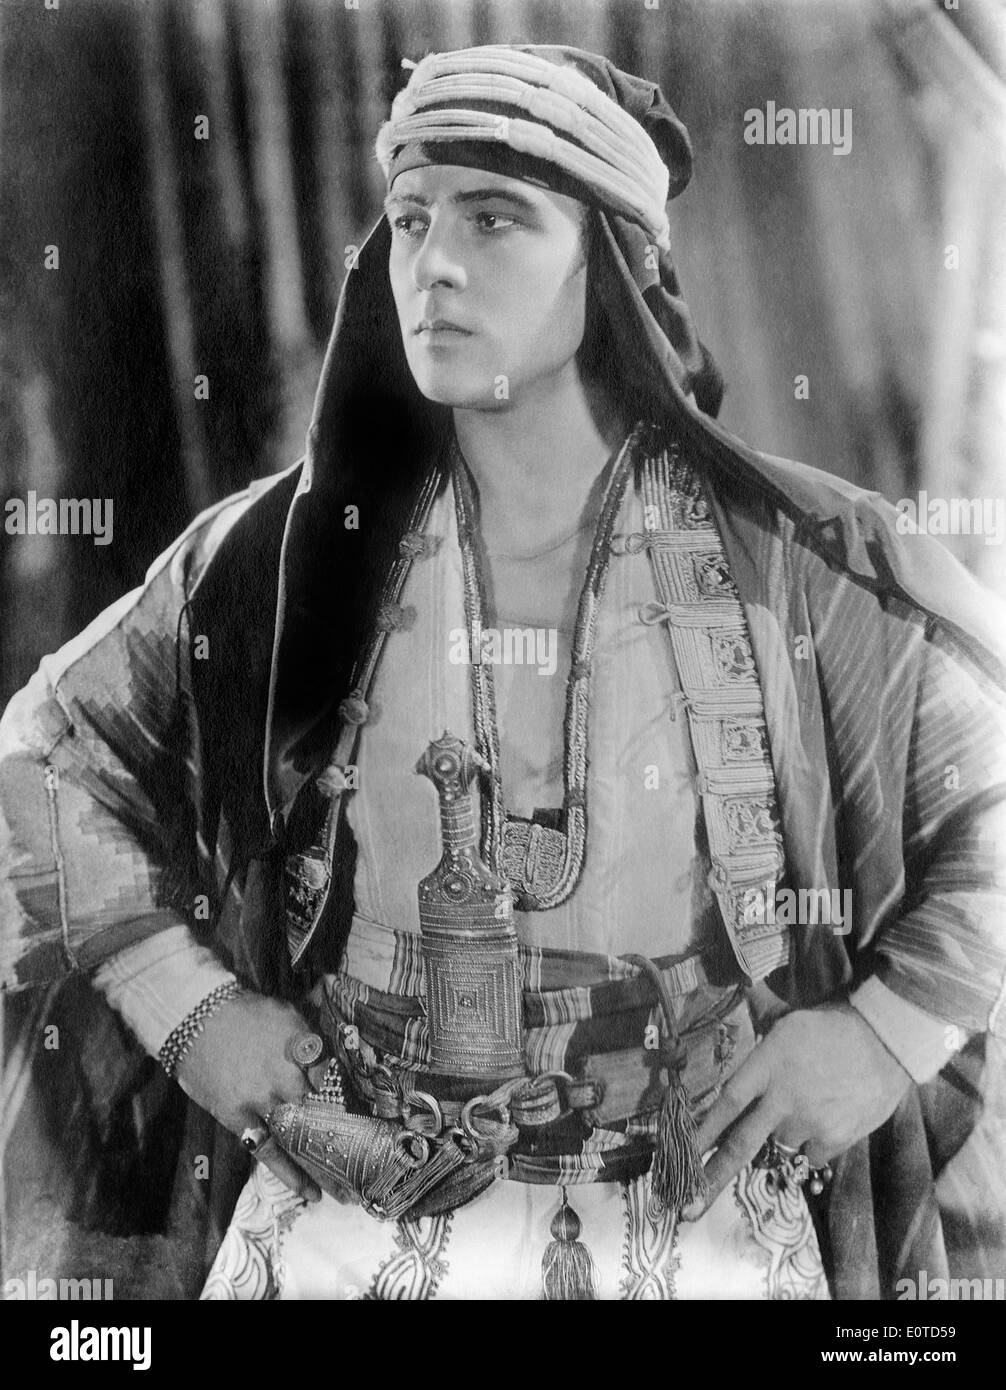 Rudolph Valentino, on-set of the Silent Film, 